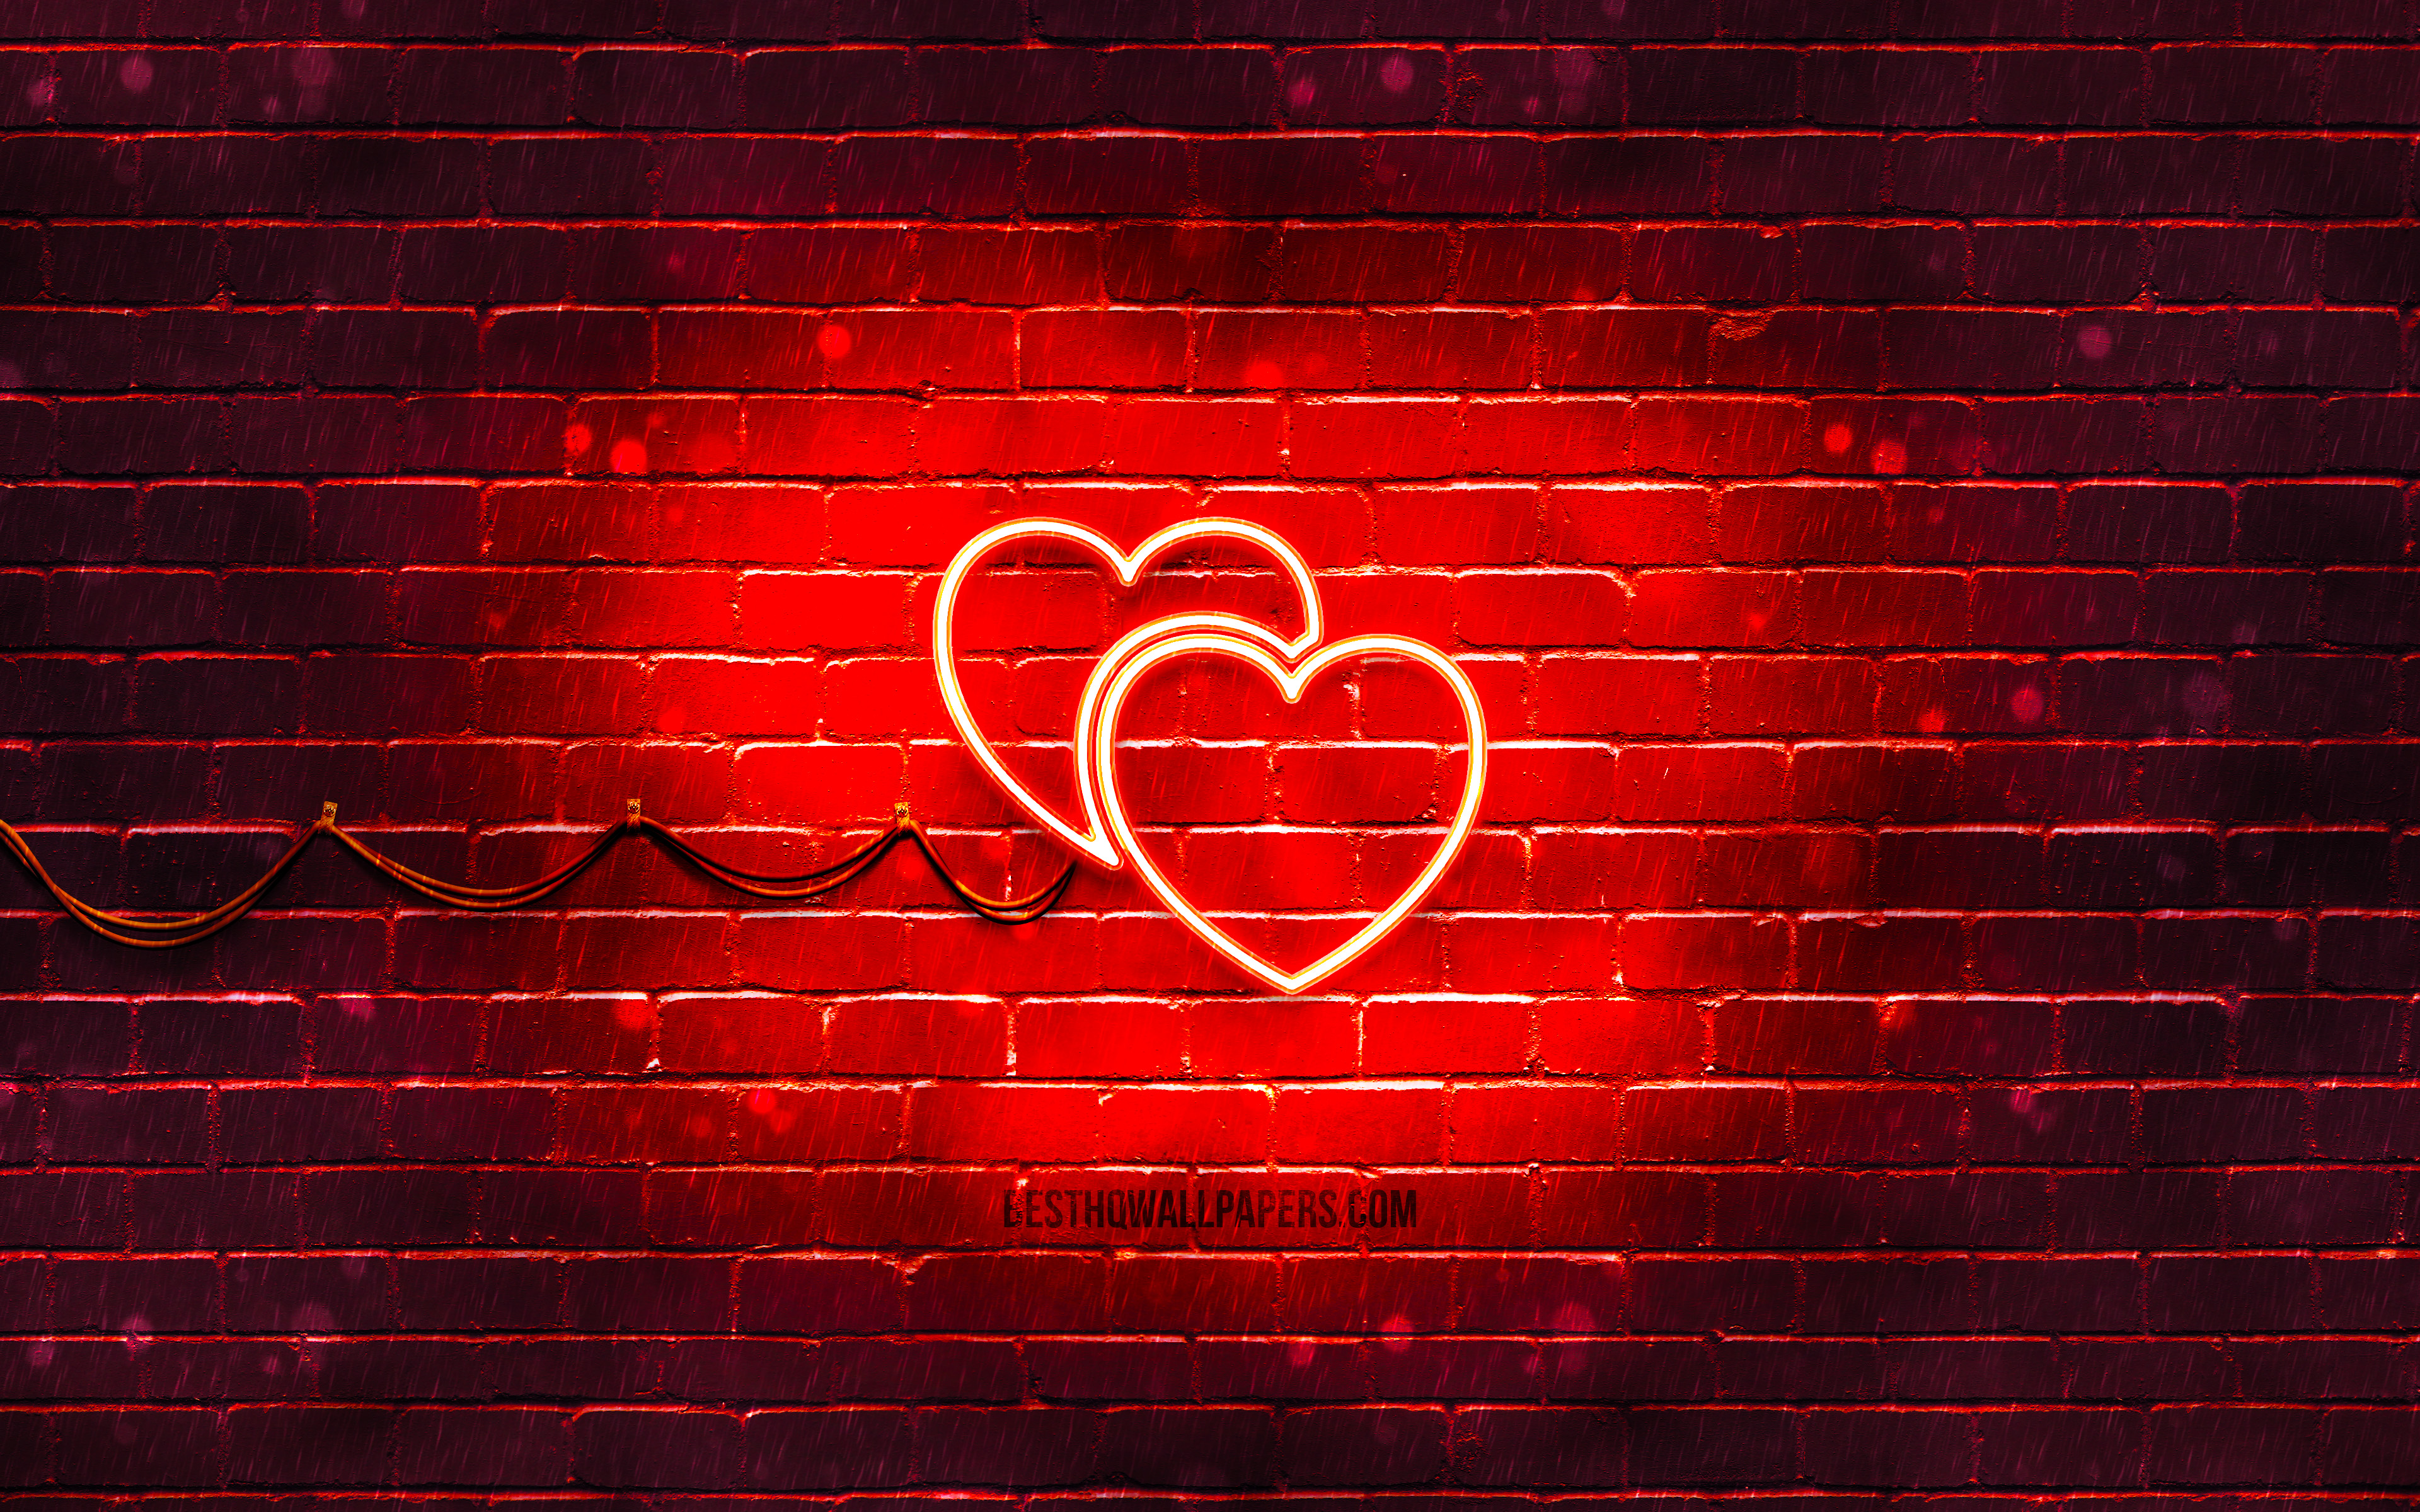 Download wallpapers Two Hearts neon icon, 4k, red background, neon symbols,...